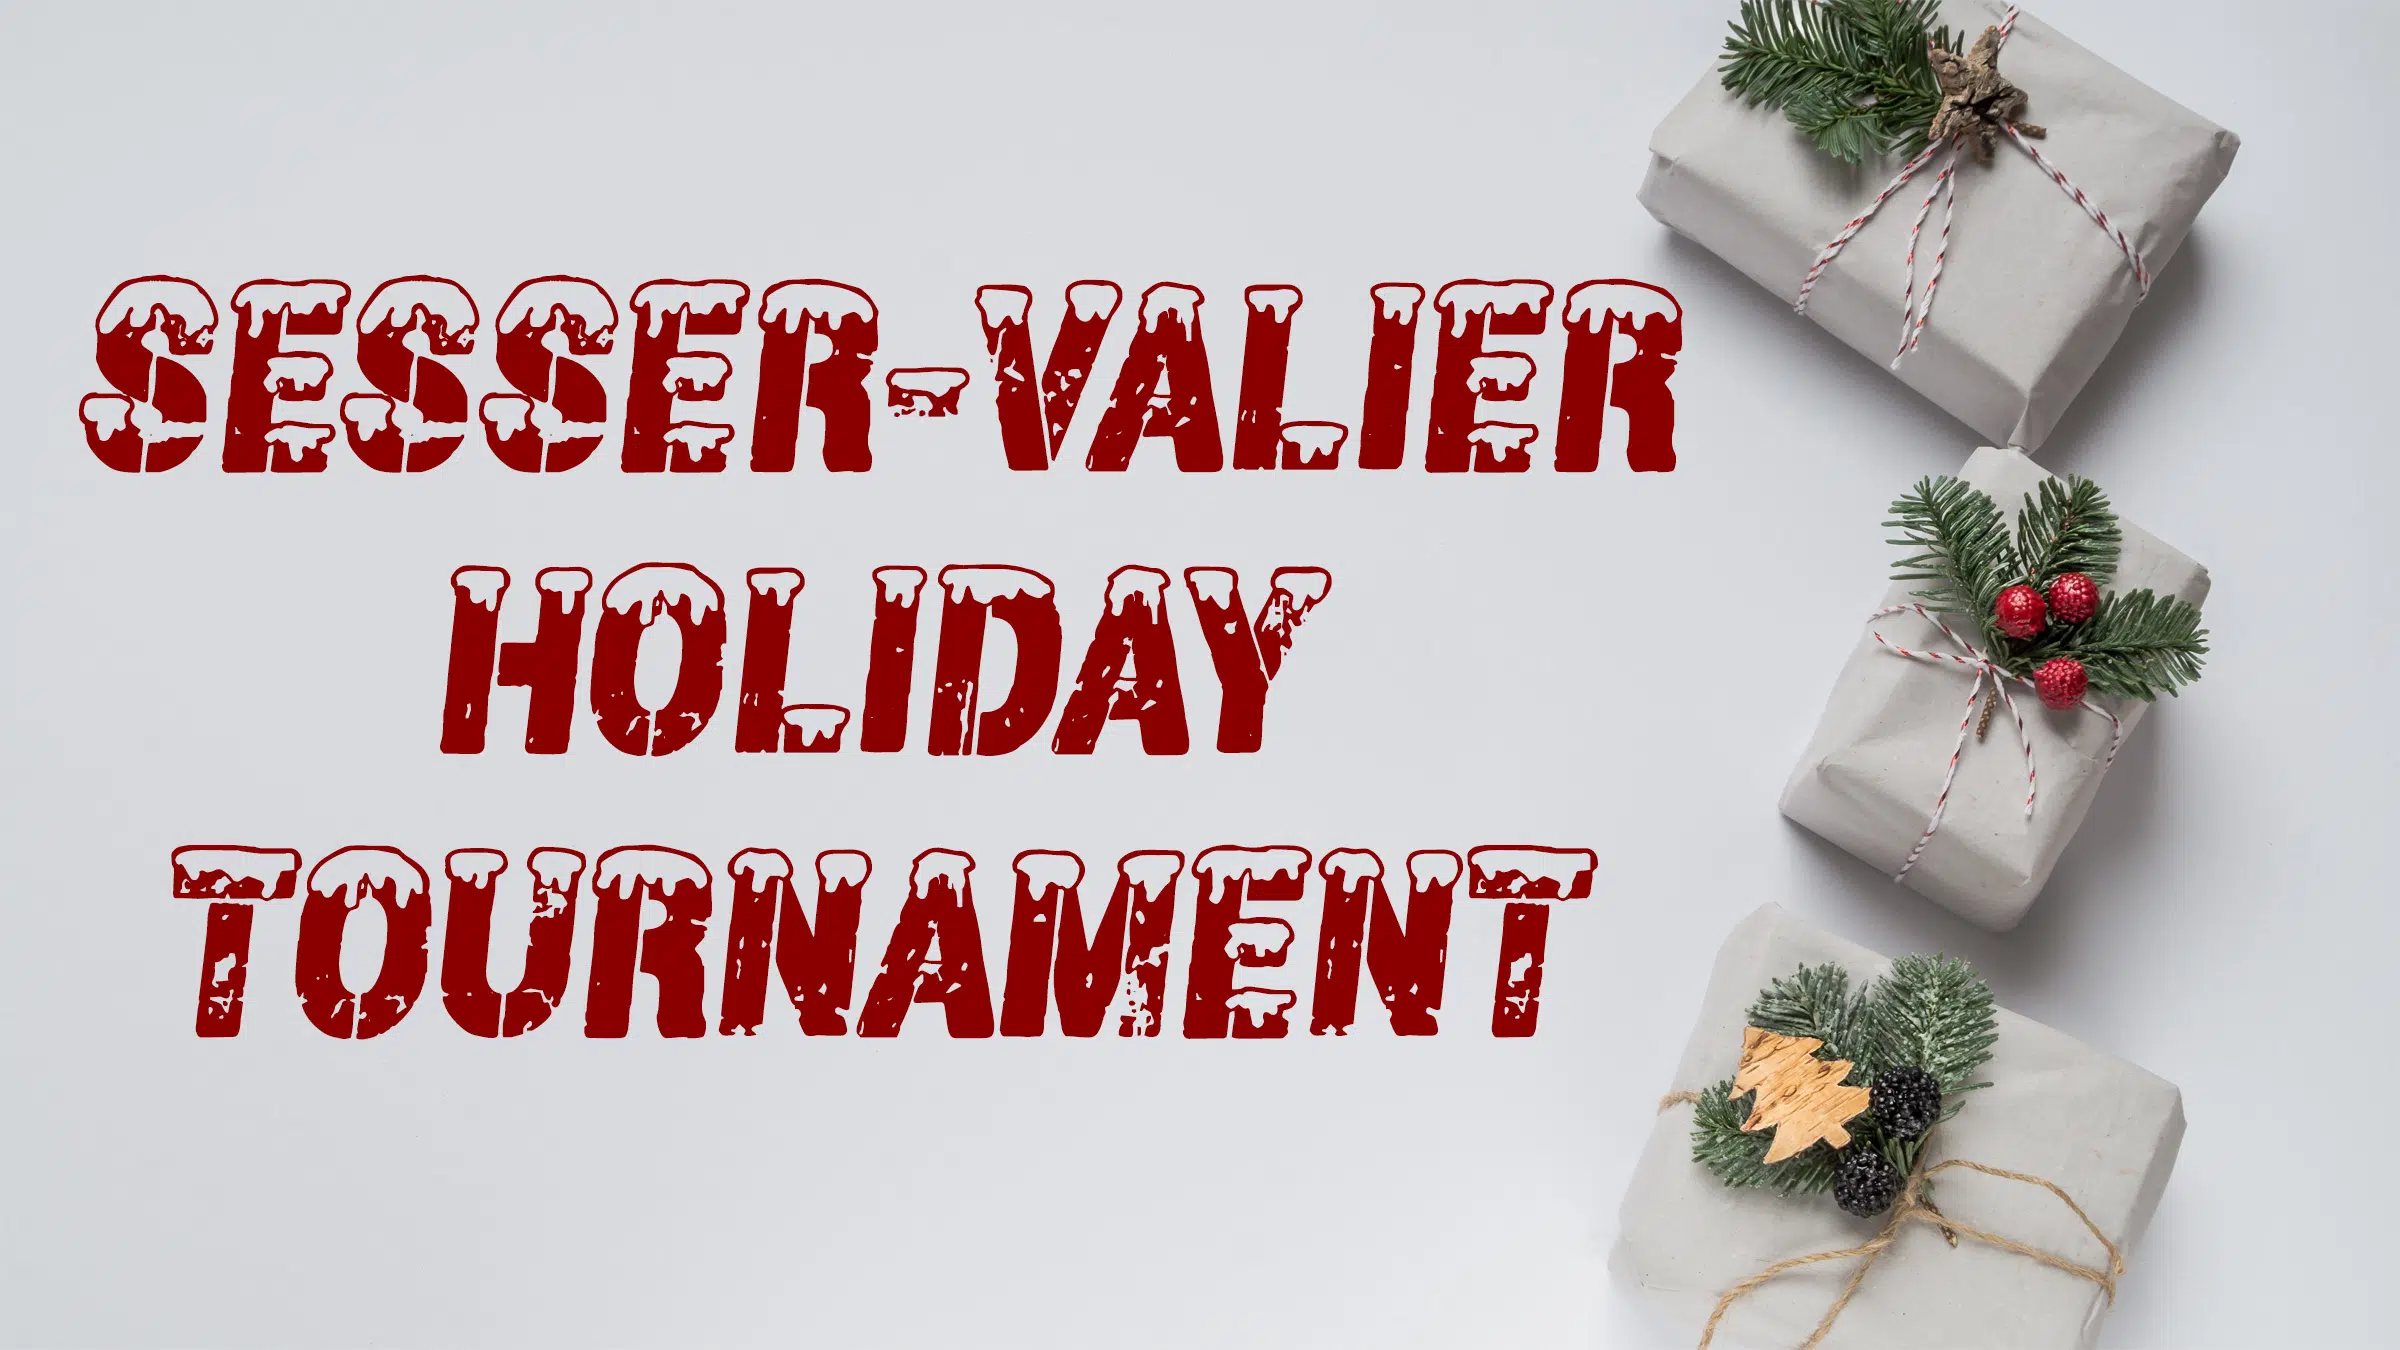 Schedule is Out for SesserValier Holiday Tournament Vandalia Radio